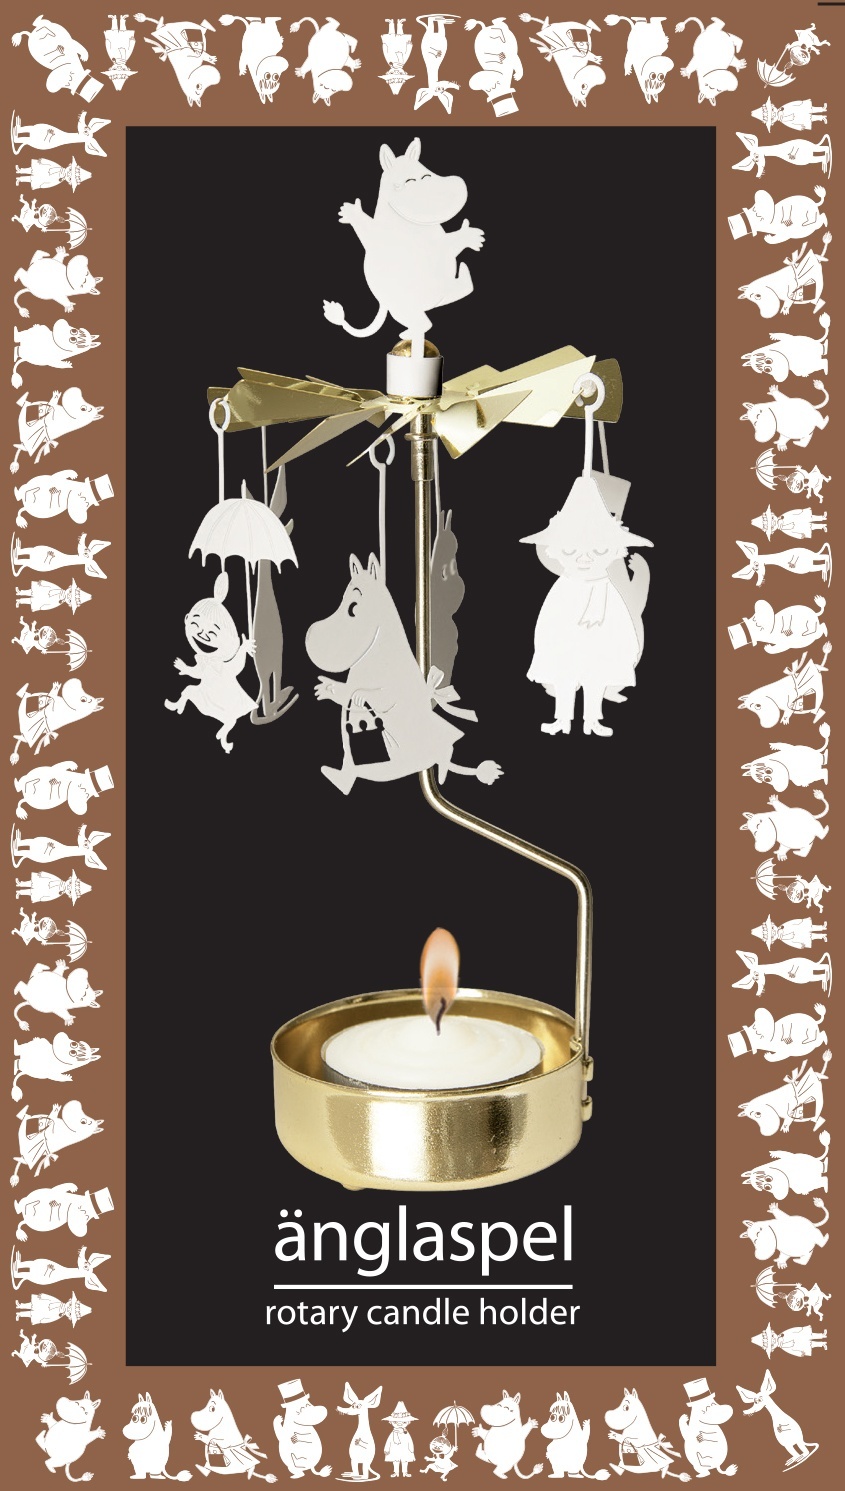 New Moomin rotary candle holder Moomin family from Japan 